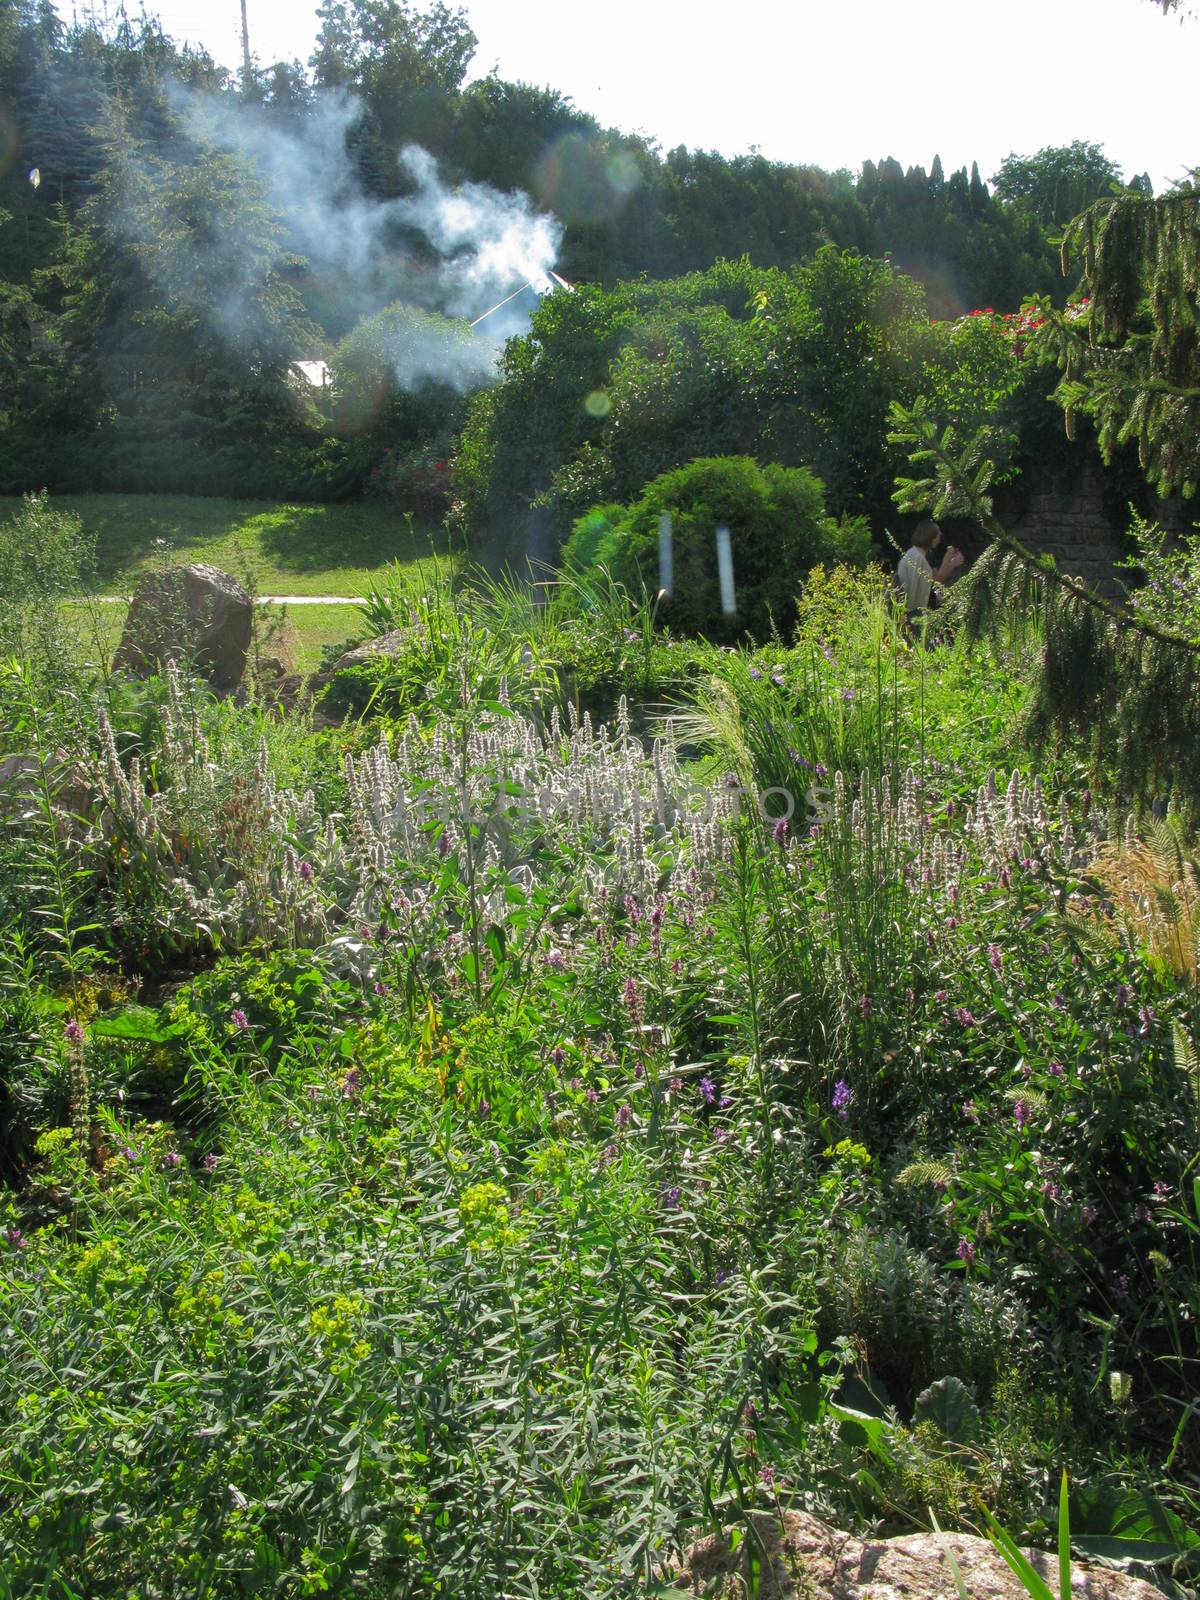 Green thickets of bushes and flowers covered with grass next to the house standing among the trees with white smoke coming from the pipe.